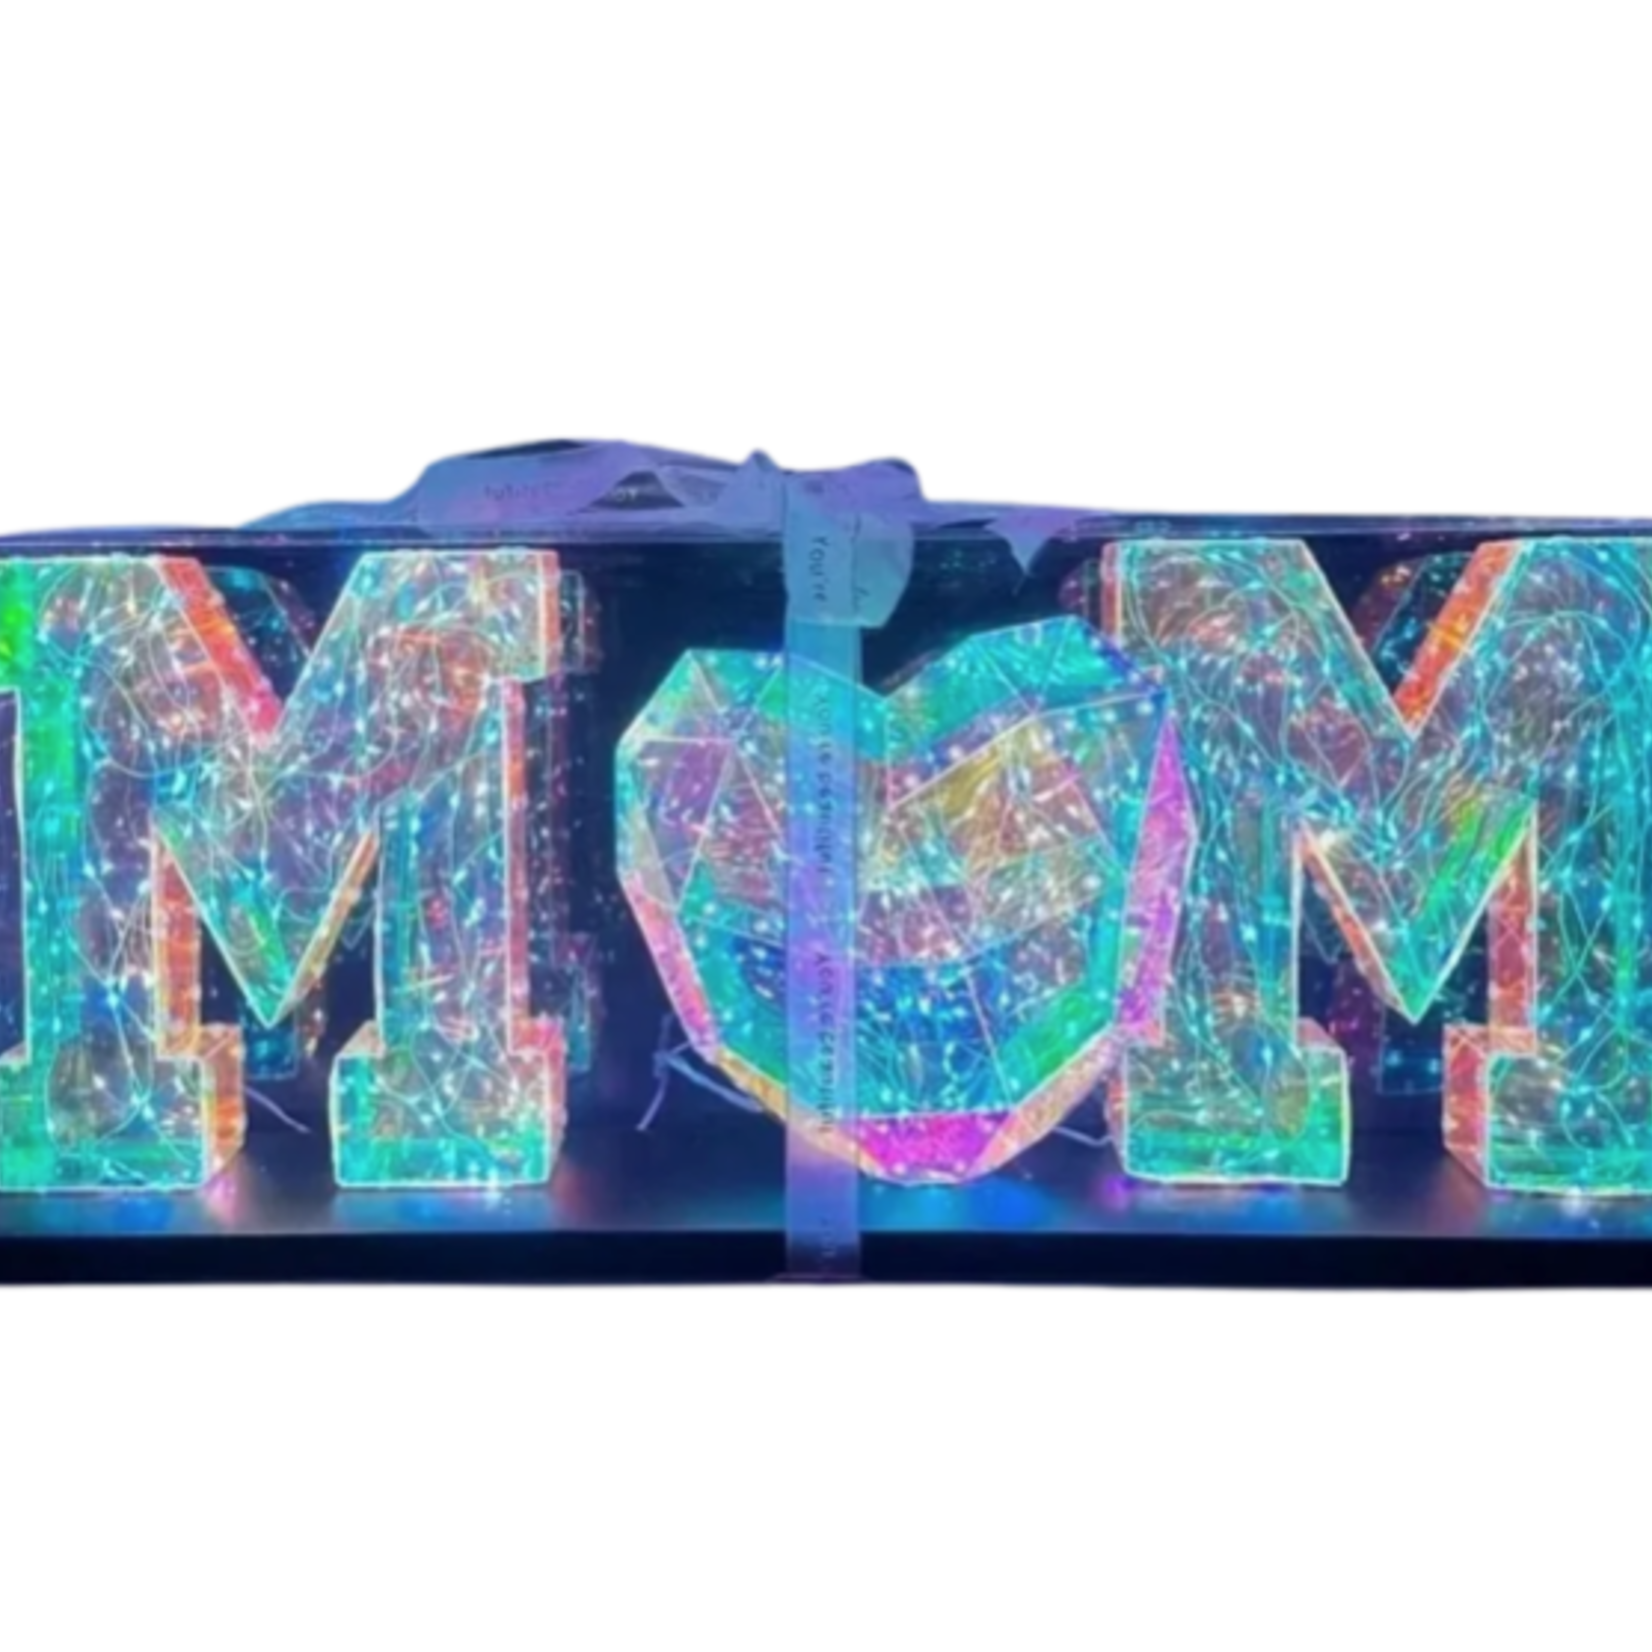 LED "MOM" LED HOLOGRAPHIC IRIDESCENT LIGHT UP 30% OFF WAS $75 NOW $52.49